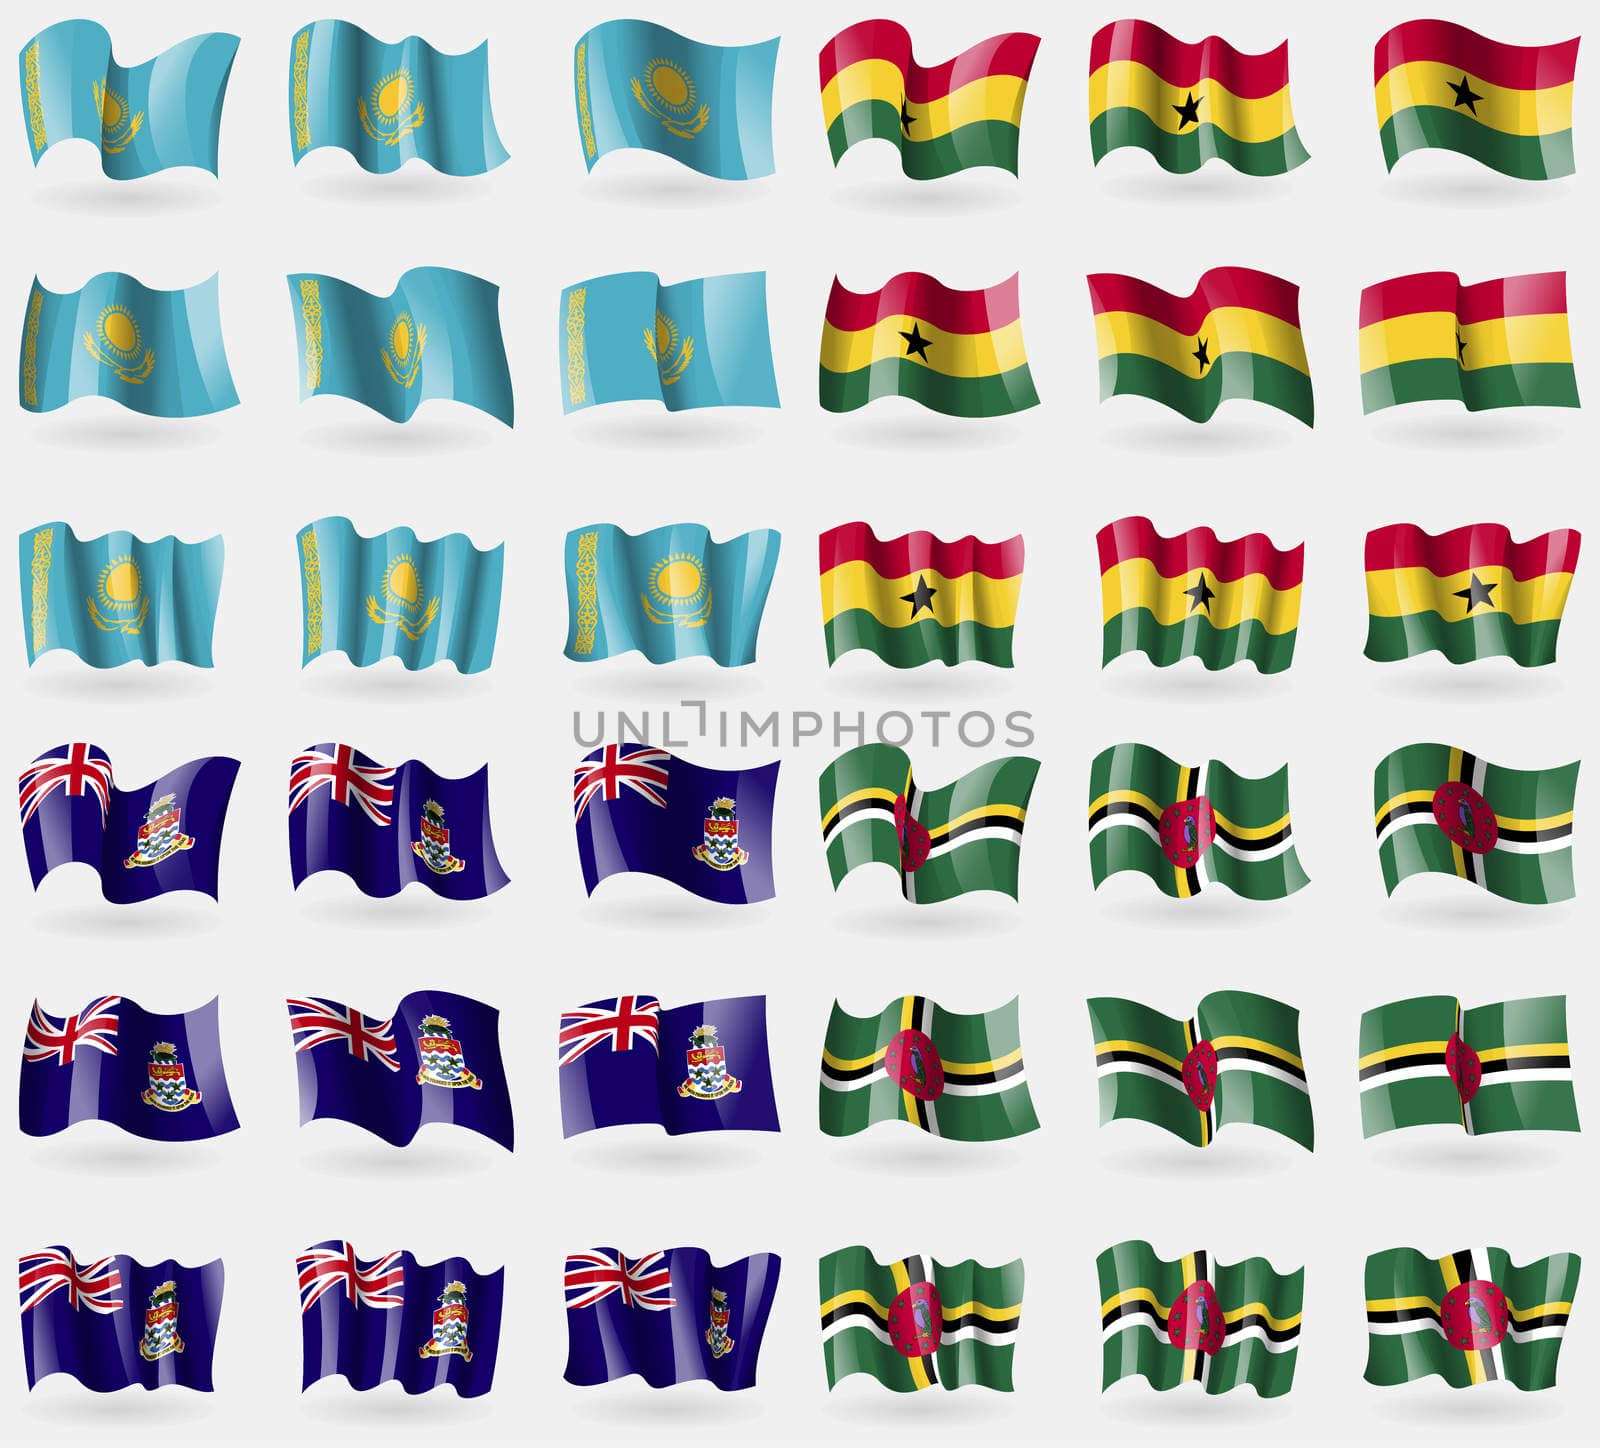 Kazakhstan, Ghana, Cayman Islands, Dominica. Set of 36 flags of the countries of the world. illustration